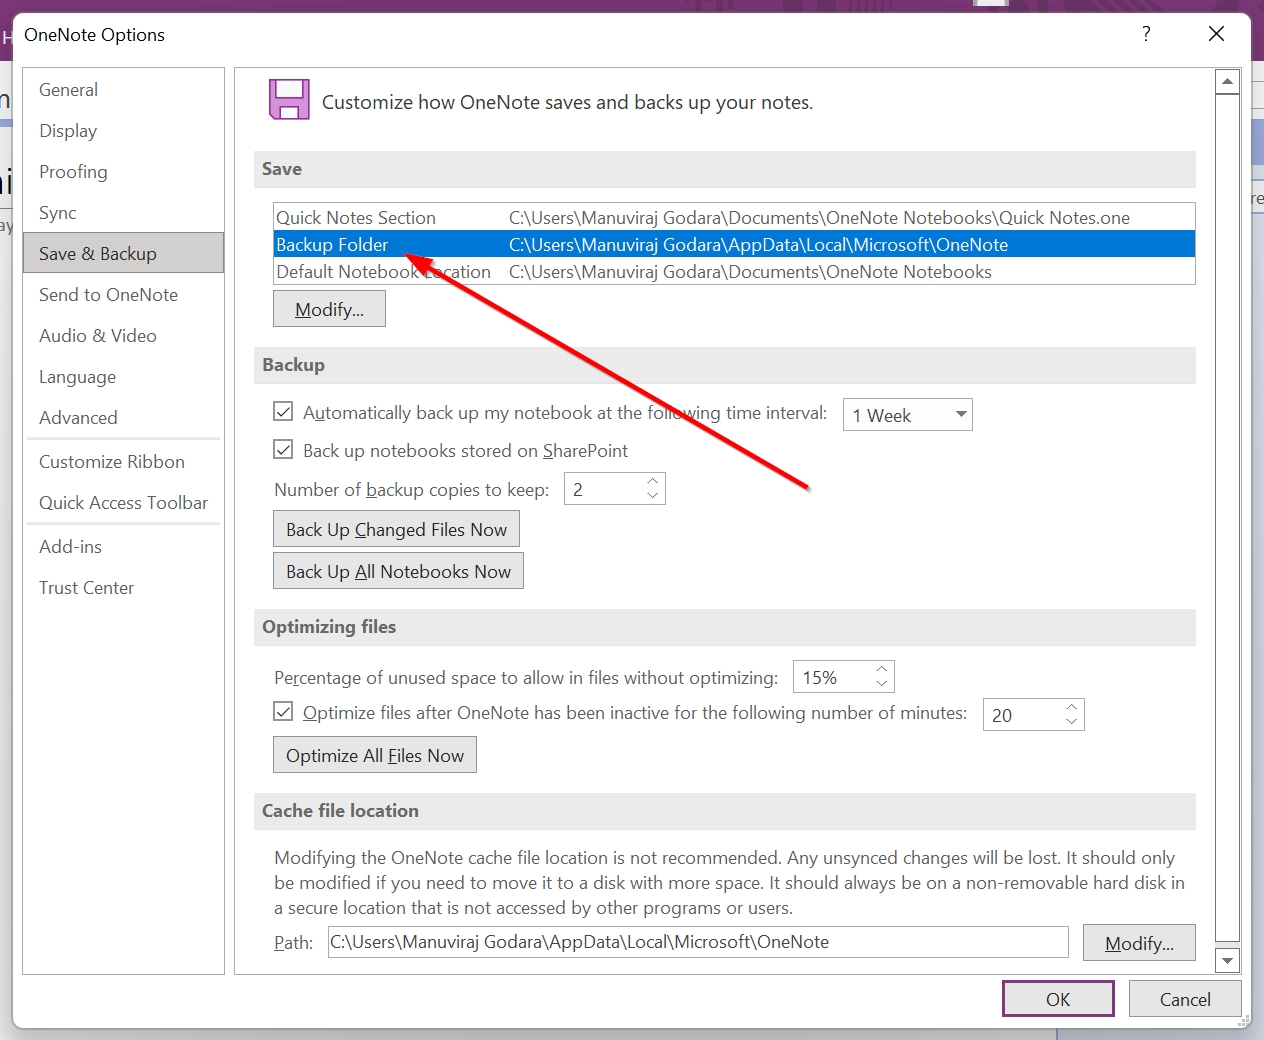 The Save & Backup option in OneNote.